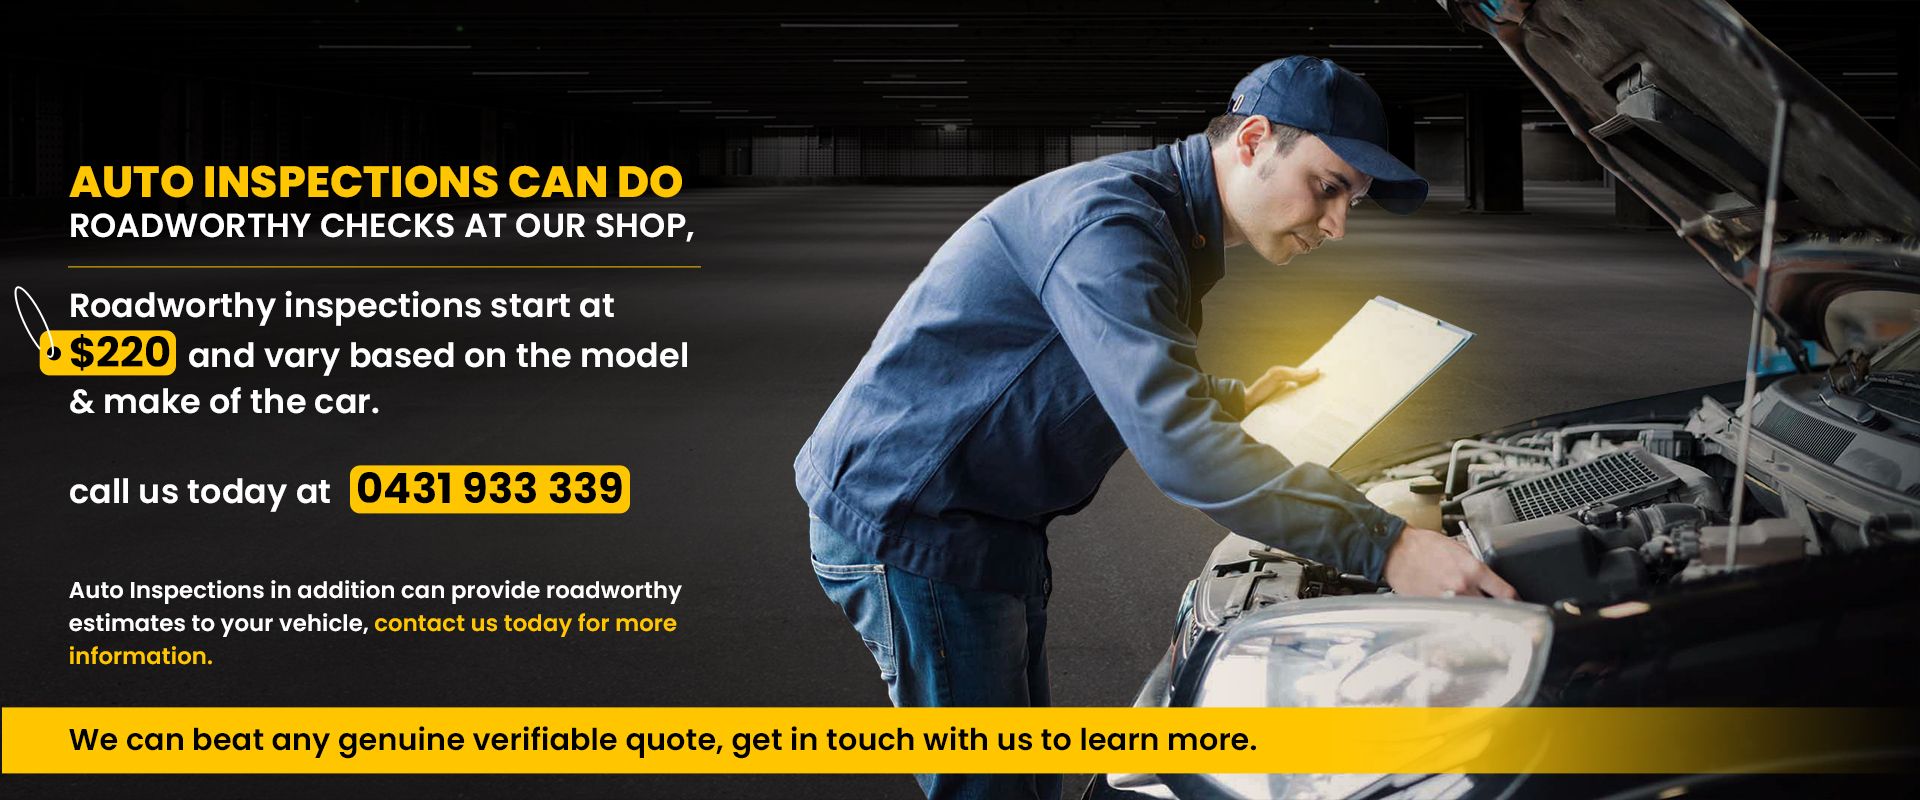 Auto Inspections Banner